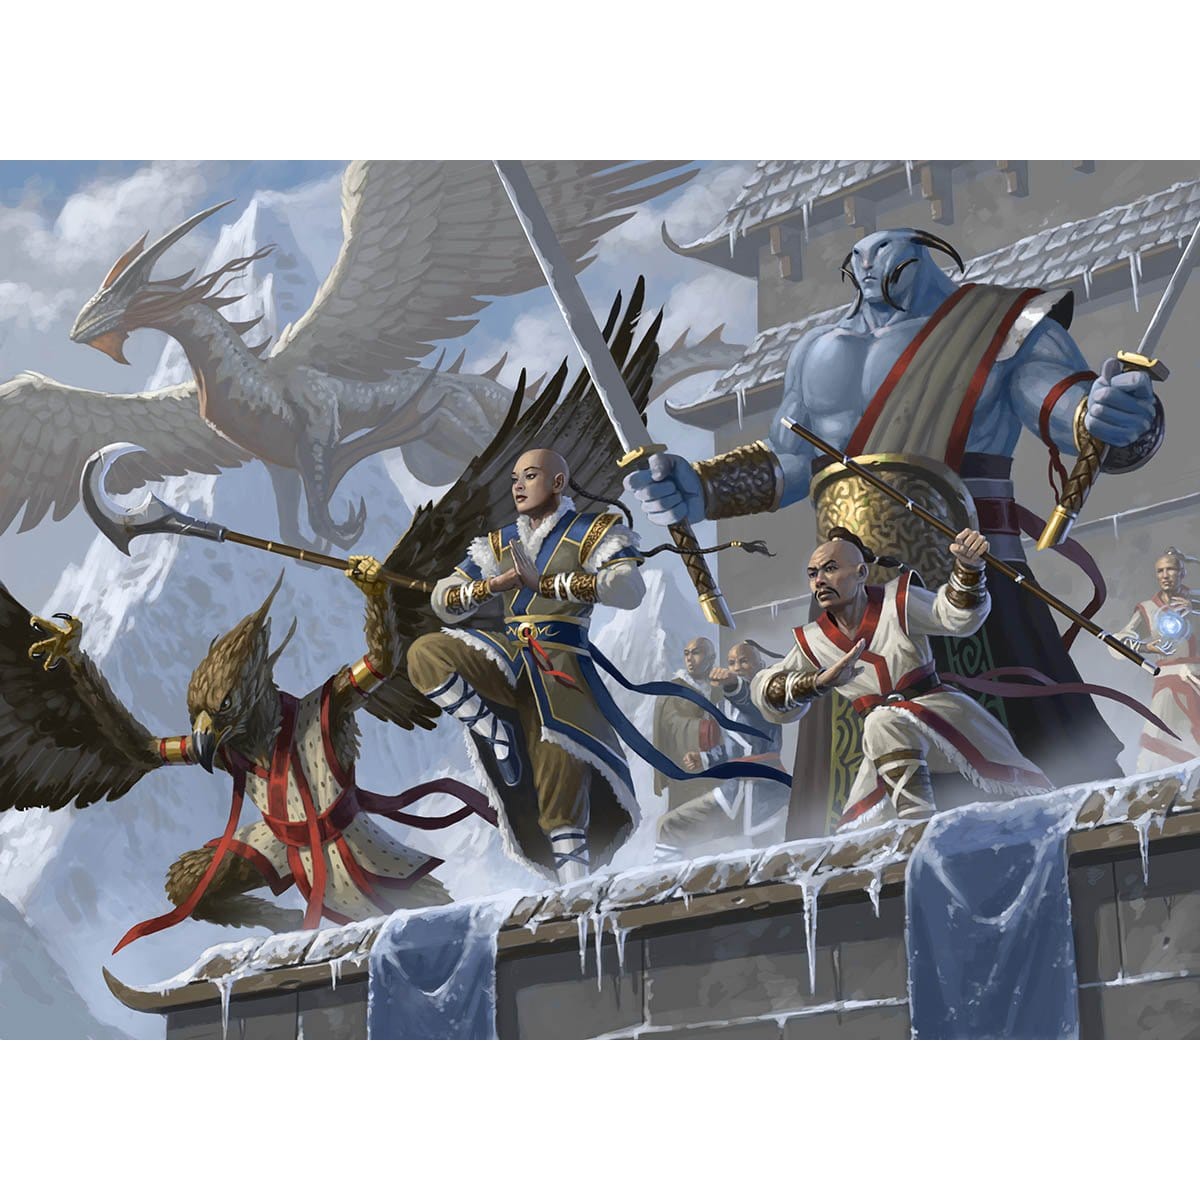 Ojutai's Command Print - Print - Original Magic Art - Accessories for Magic the Gathering and other card games